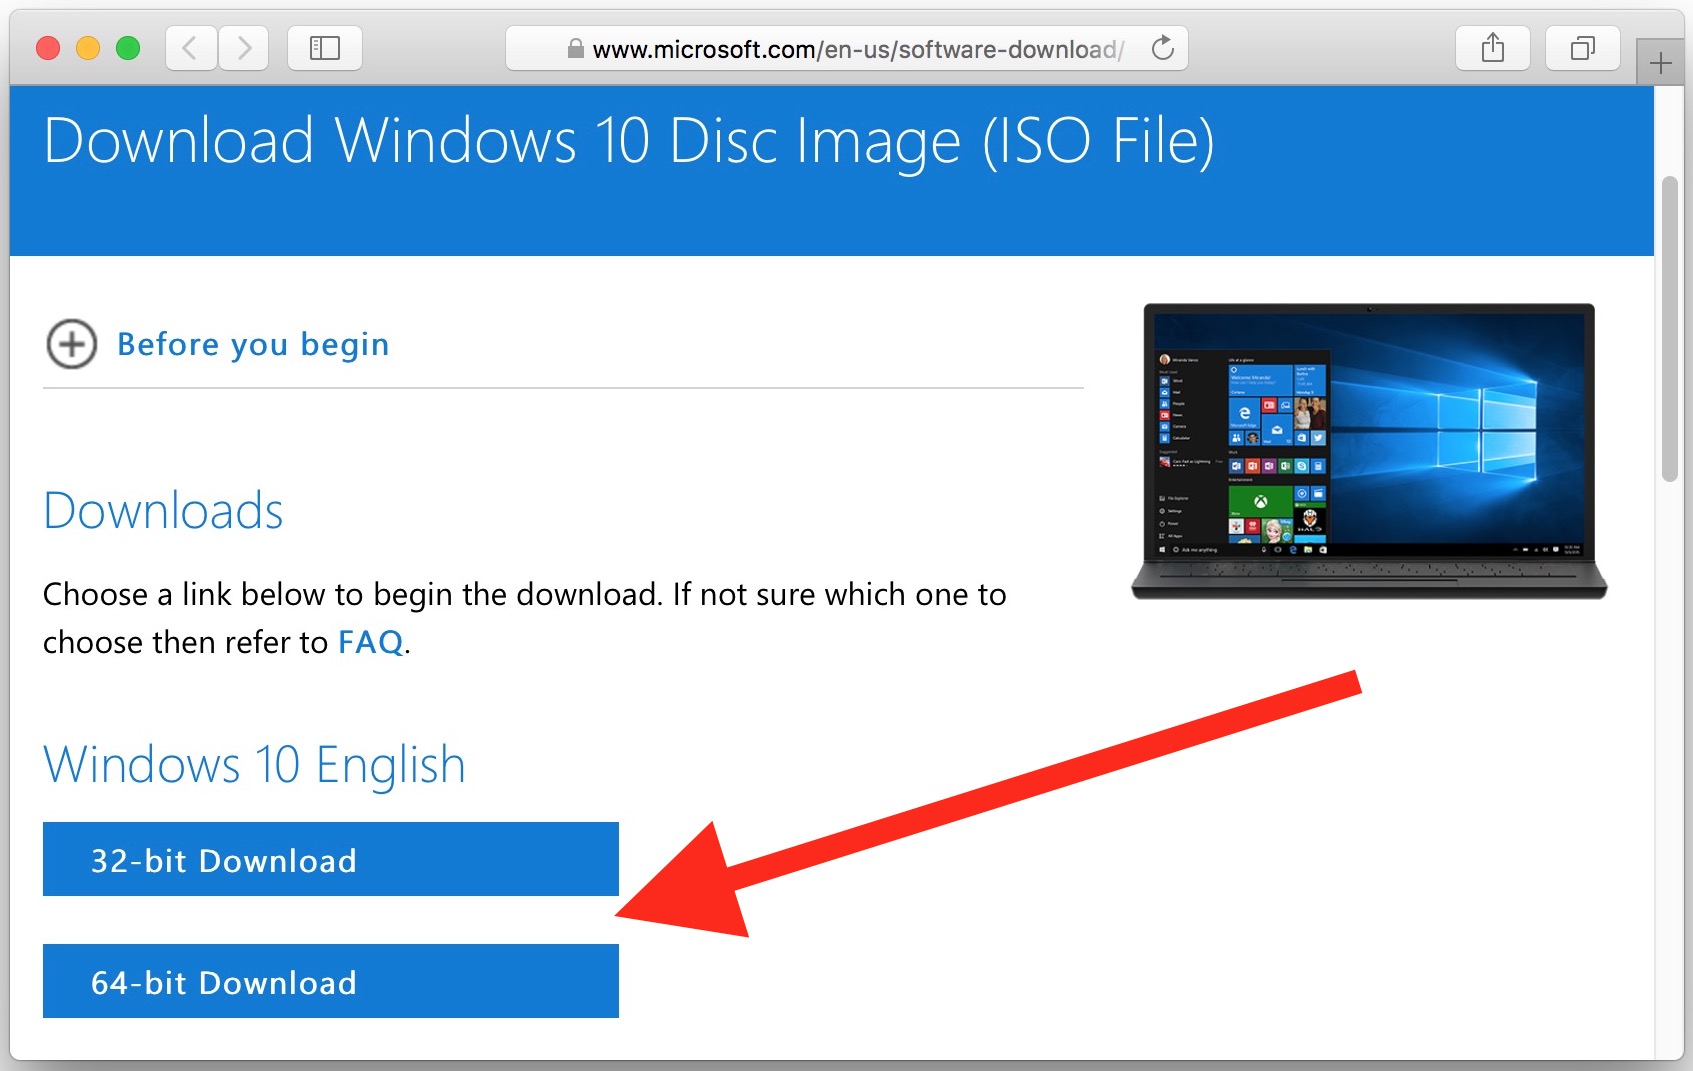 windows 10 home iso image download